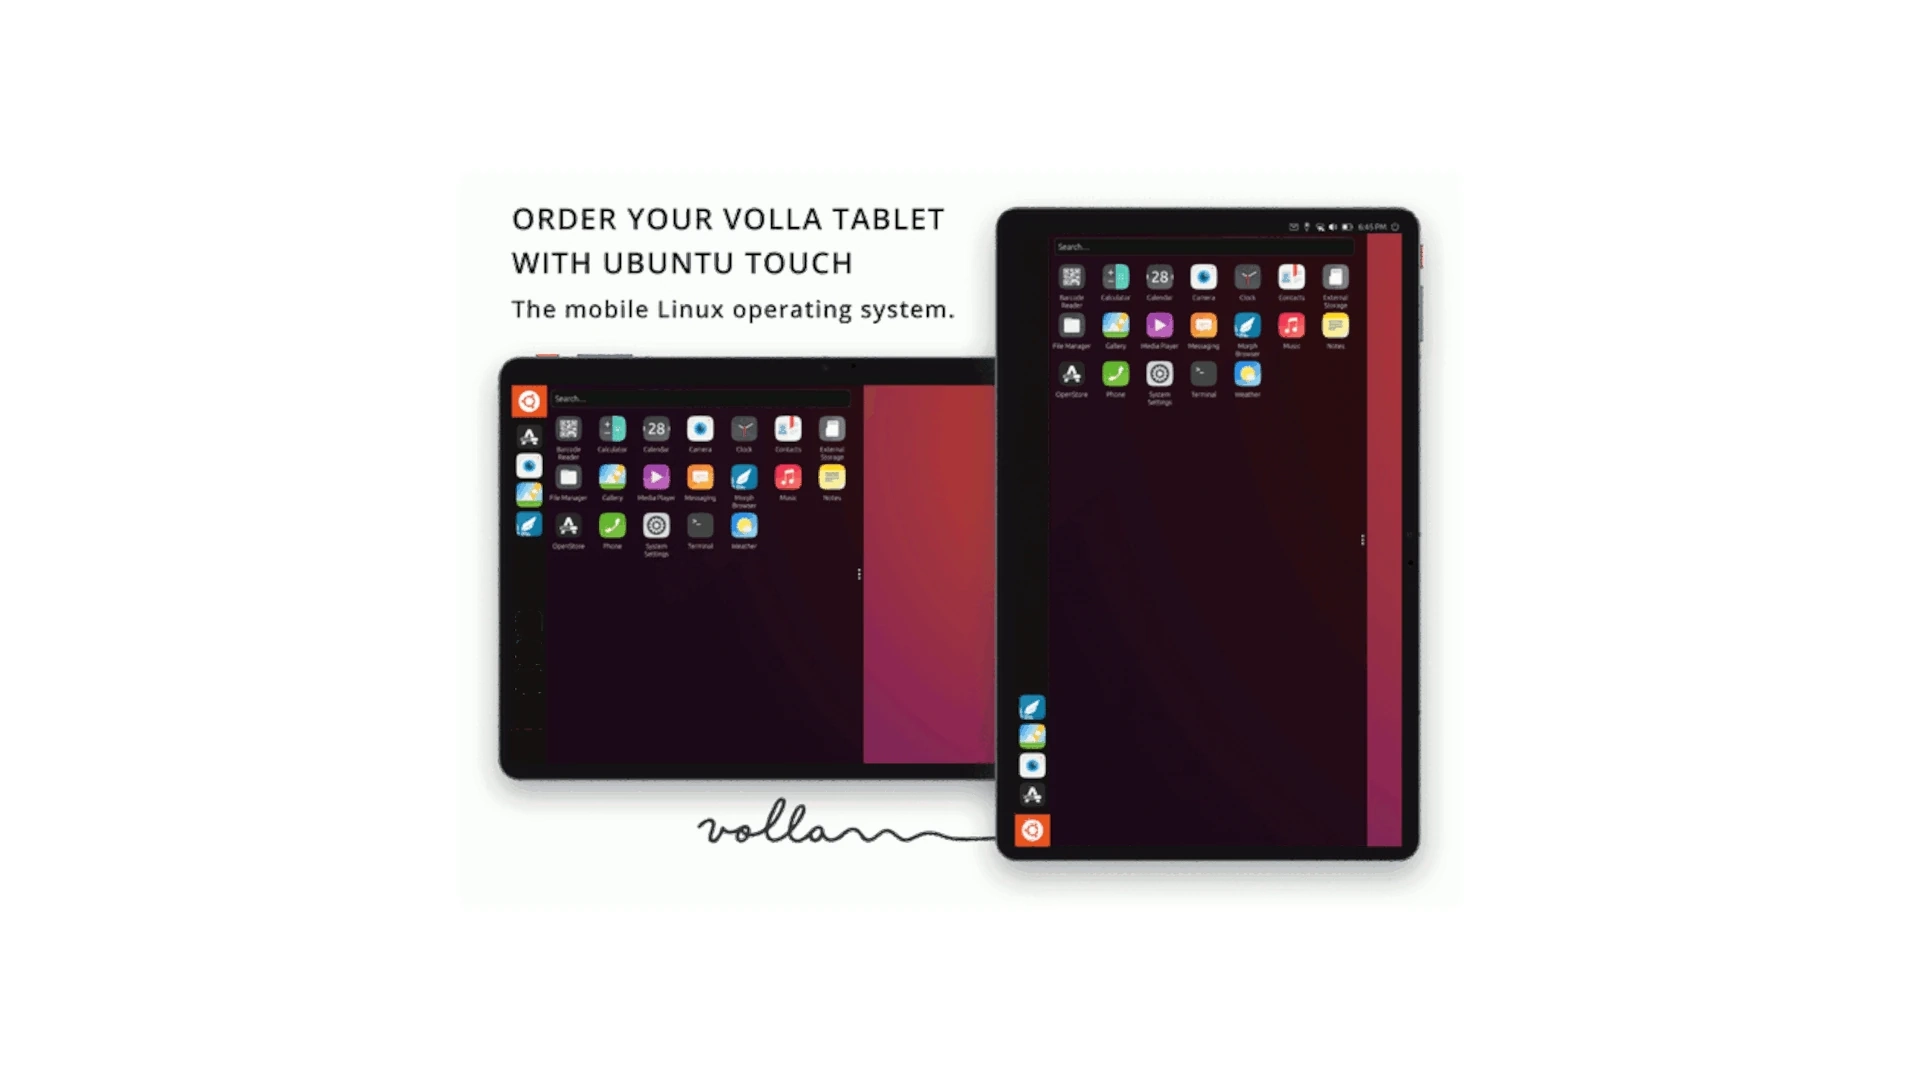 Volla Tablet Debuts on Kickstarter, Offering Support for Ubuntu Touch